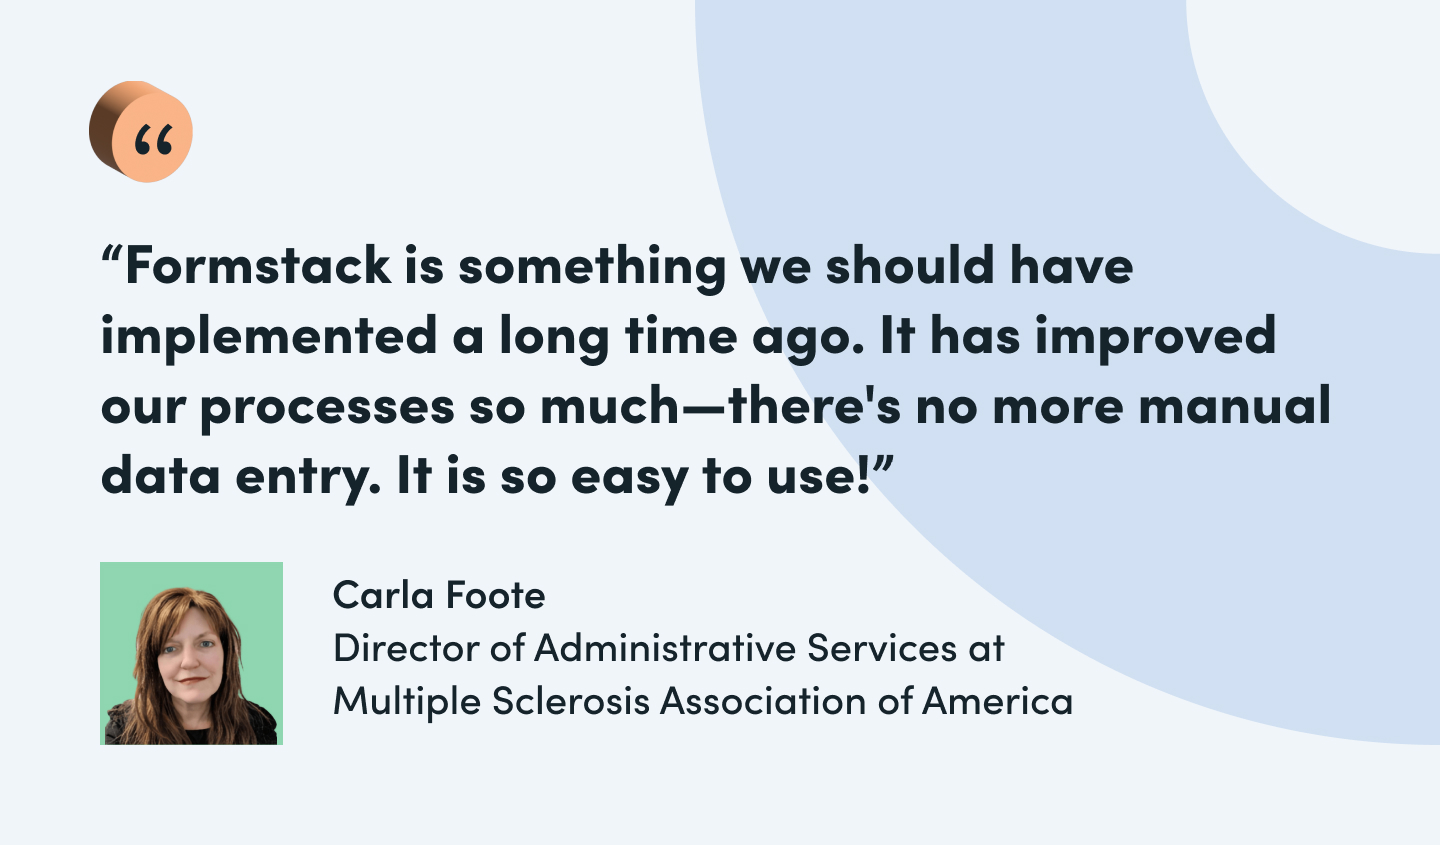 Carla Foote Formstack Testimonial Quote